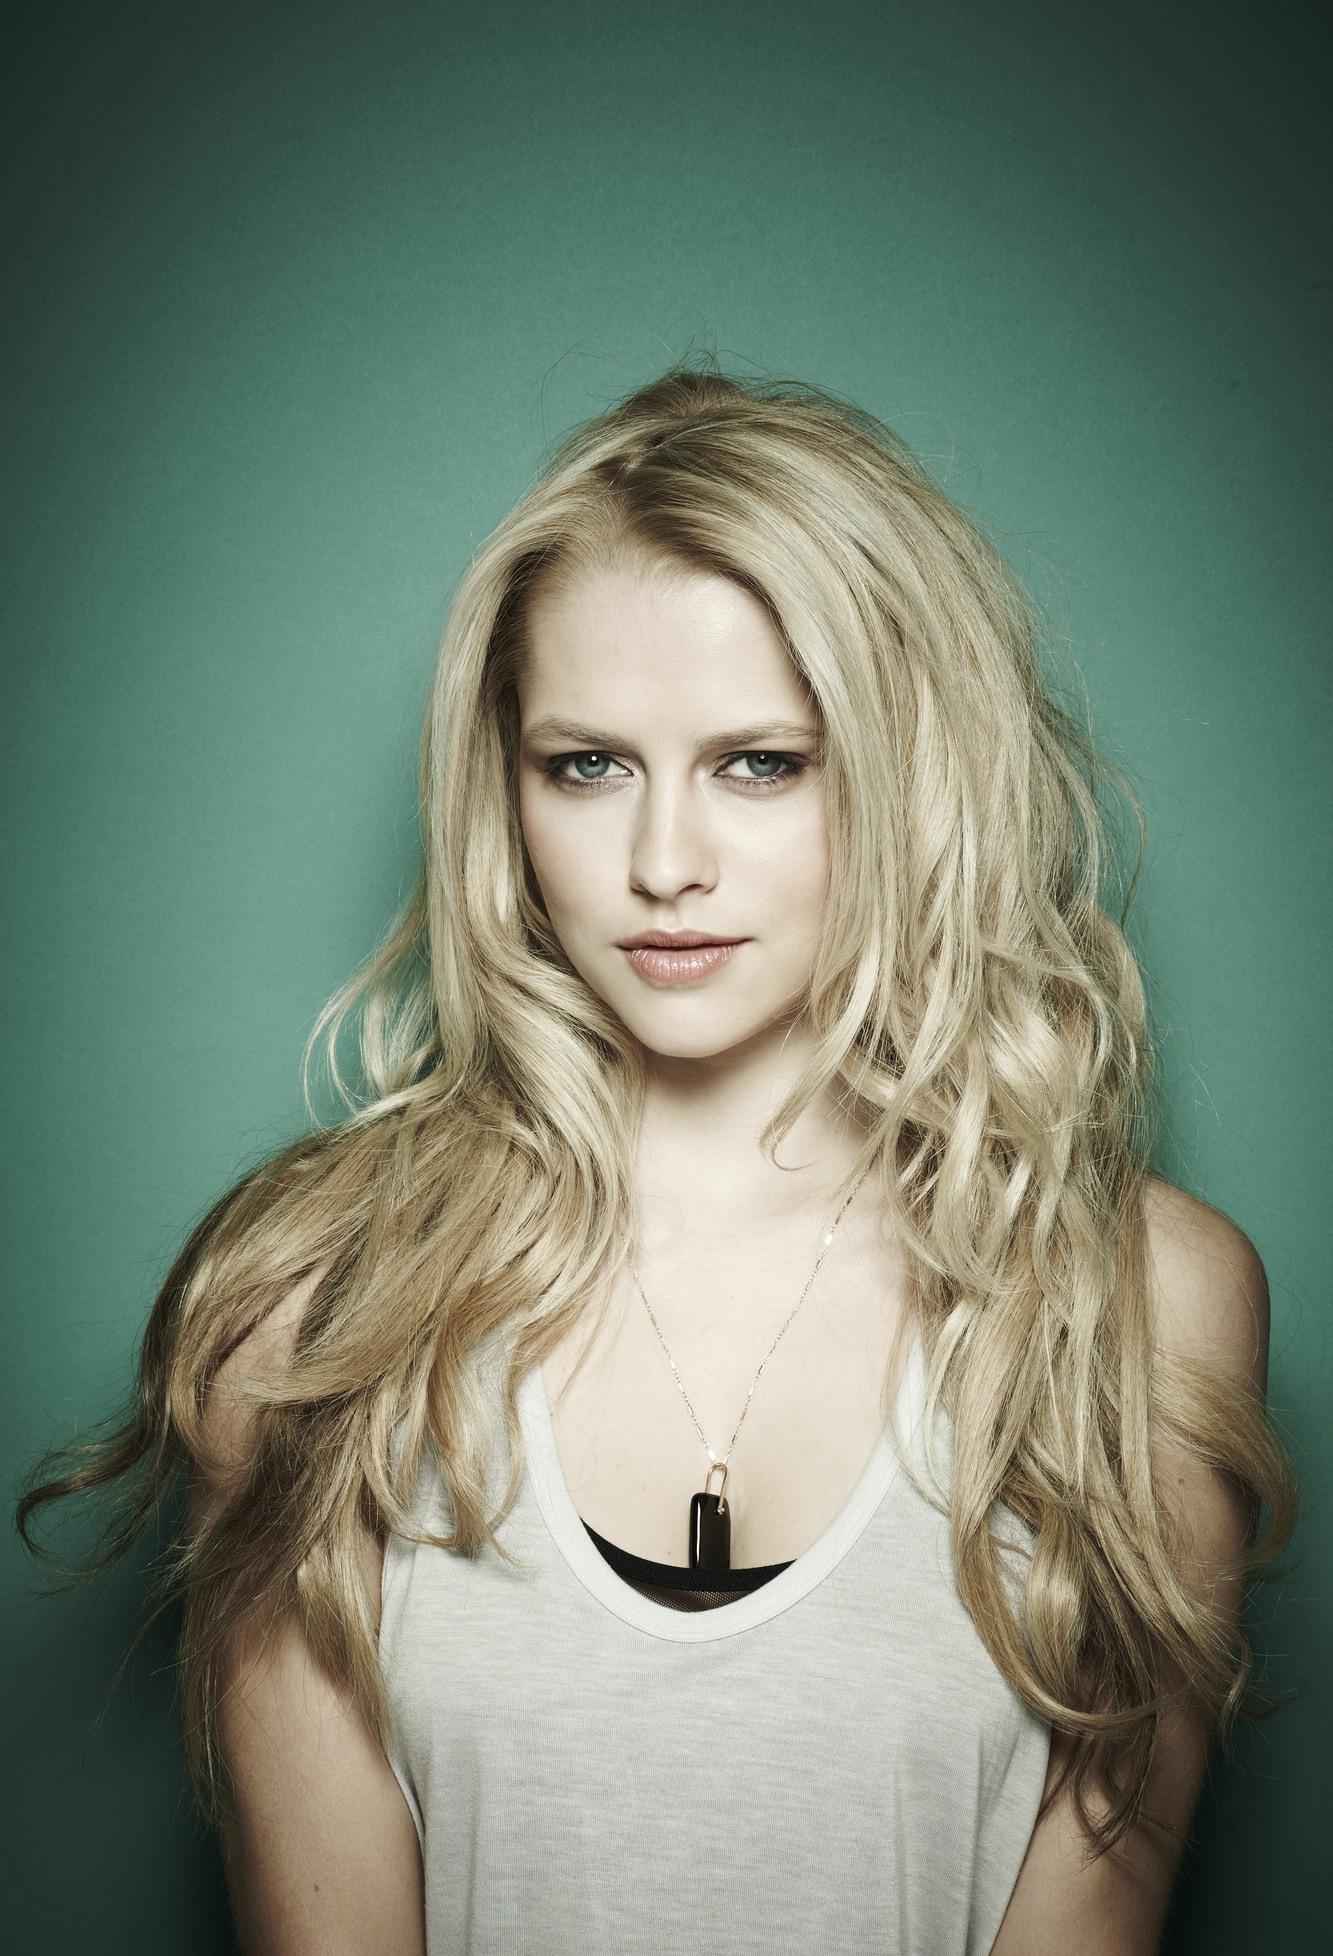 Teresa Palmer Wallpaper Image Photos Pictures Background